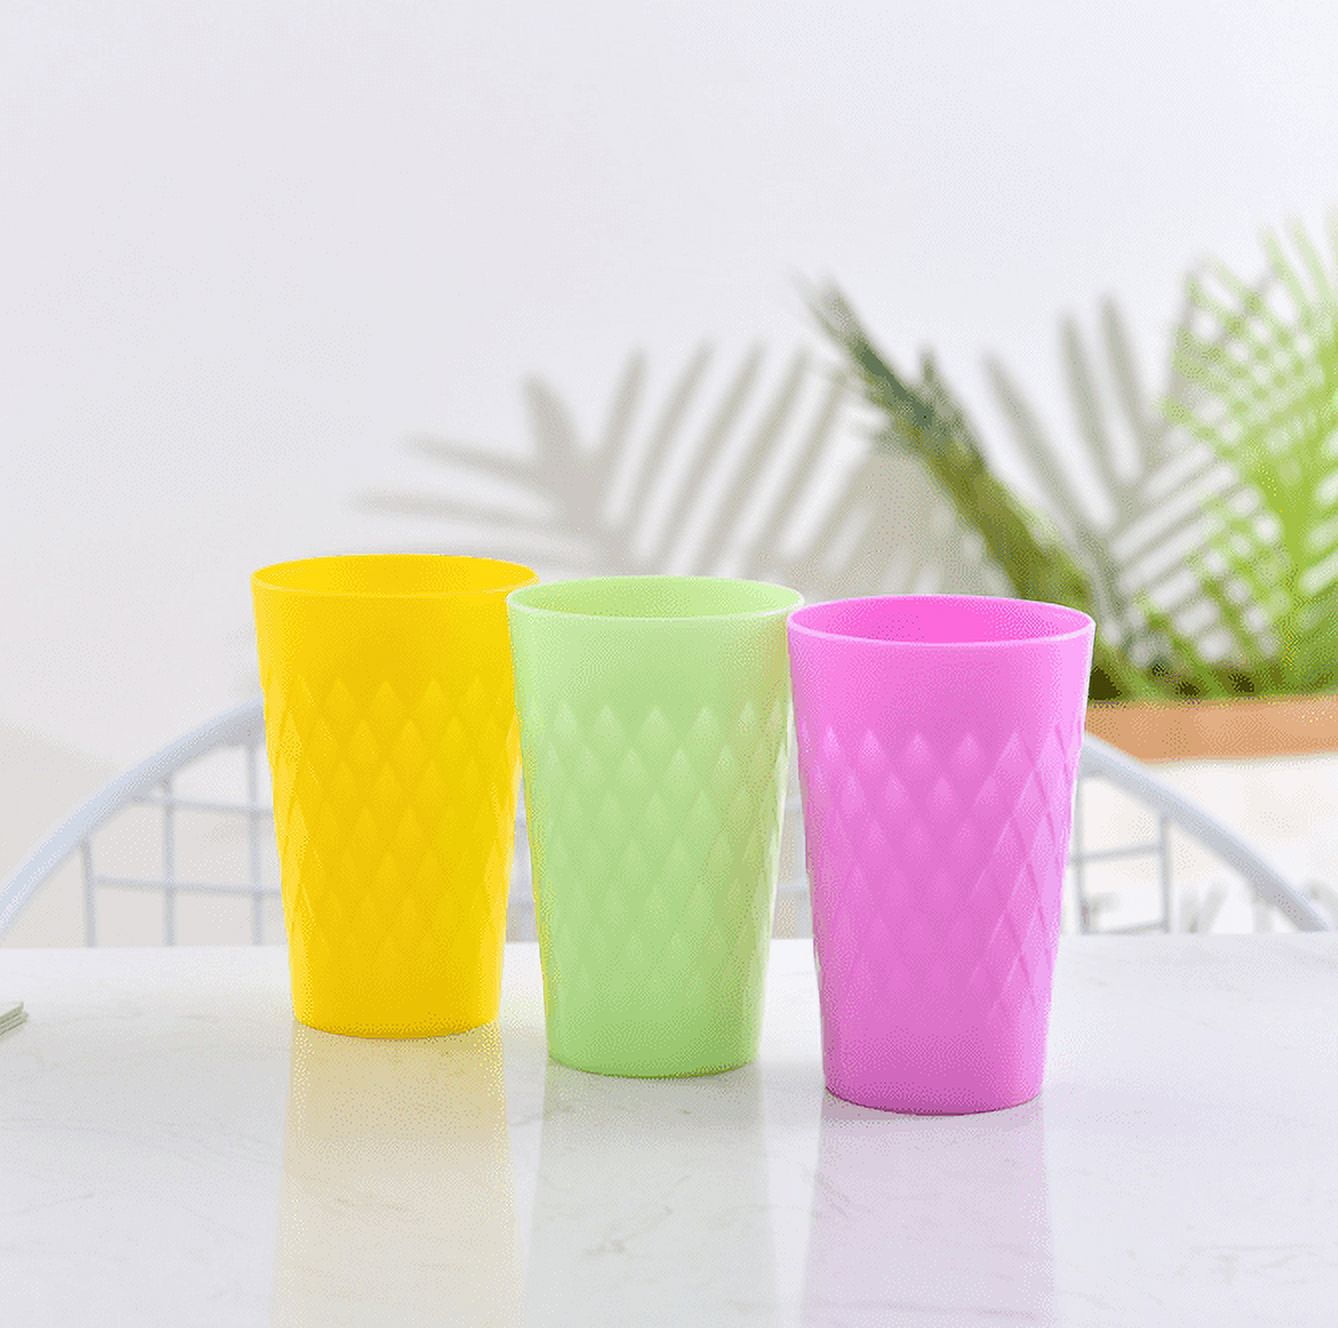 Honla 8 oz Kids Cups,Set of 20 Small Plastic Cups for Kids,BPA  Free Cups,Dishwasher Safe,Reusable and Unbreakable Children Drinking Cups  Tumblers in 5 Assorted Colors: Tumblers & Water Glasses